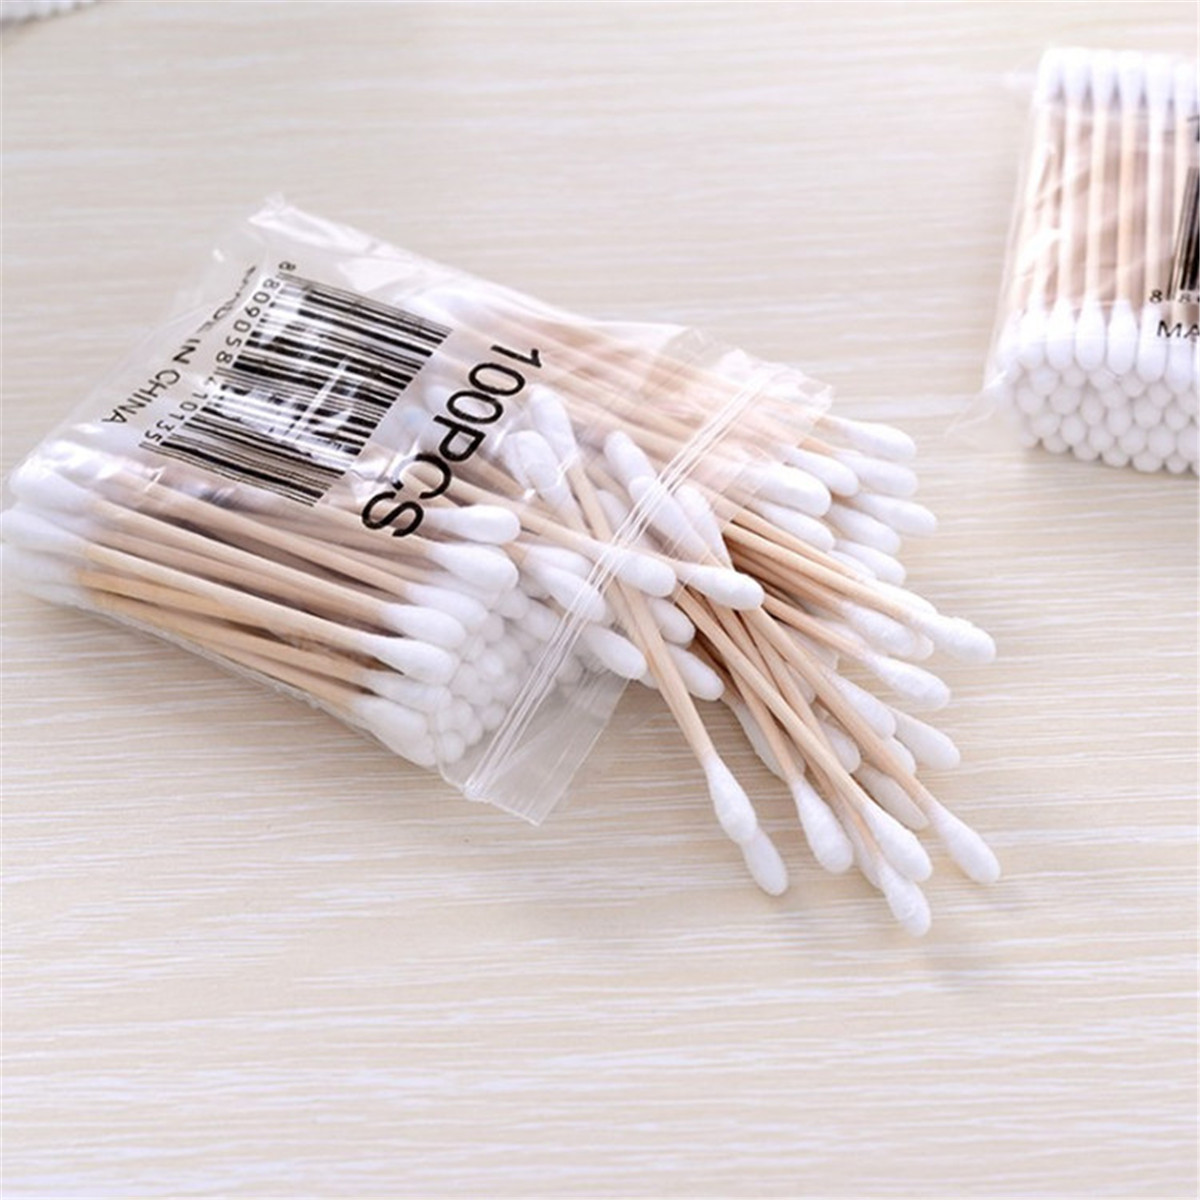 100x-Cotton-Swabs-Swab-Applicator-Q-Tips-Double-Head-Wooden-Stick-Cleaning-Tools-1582736-3